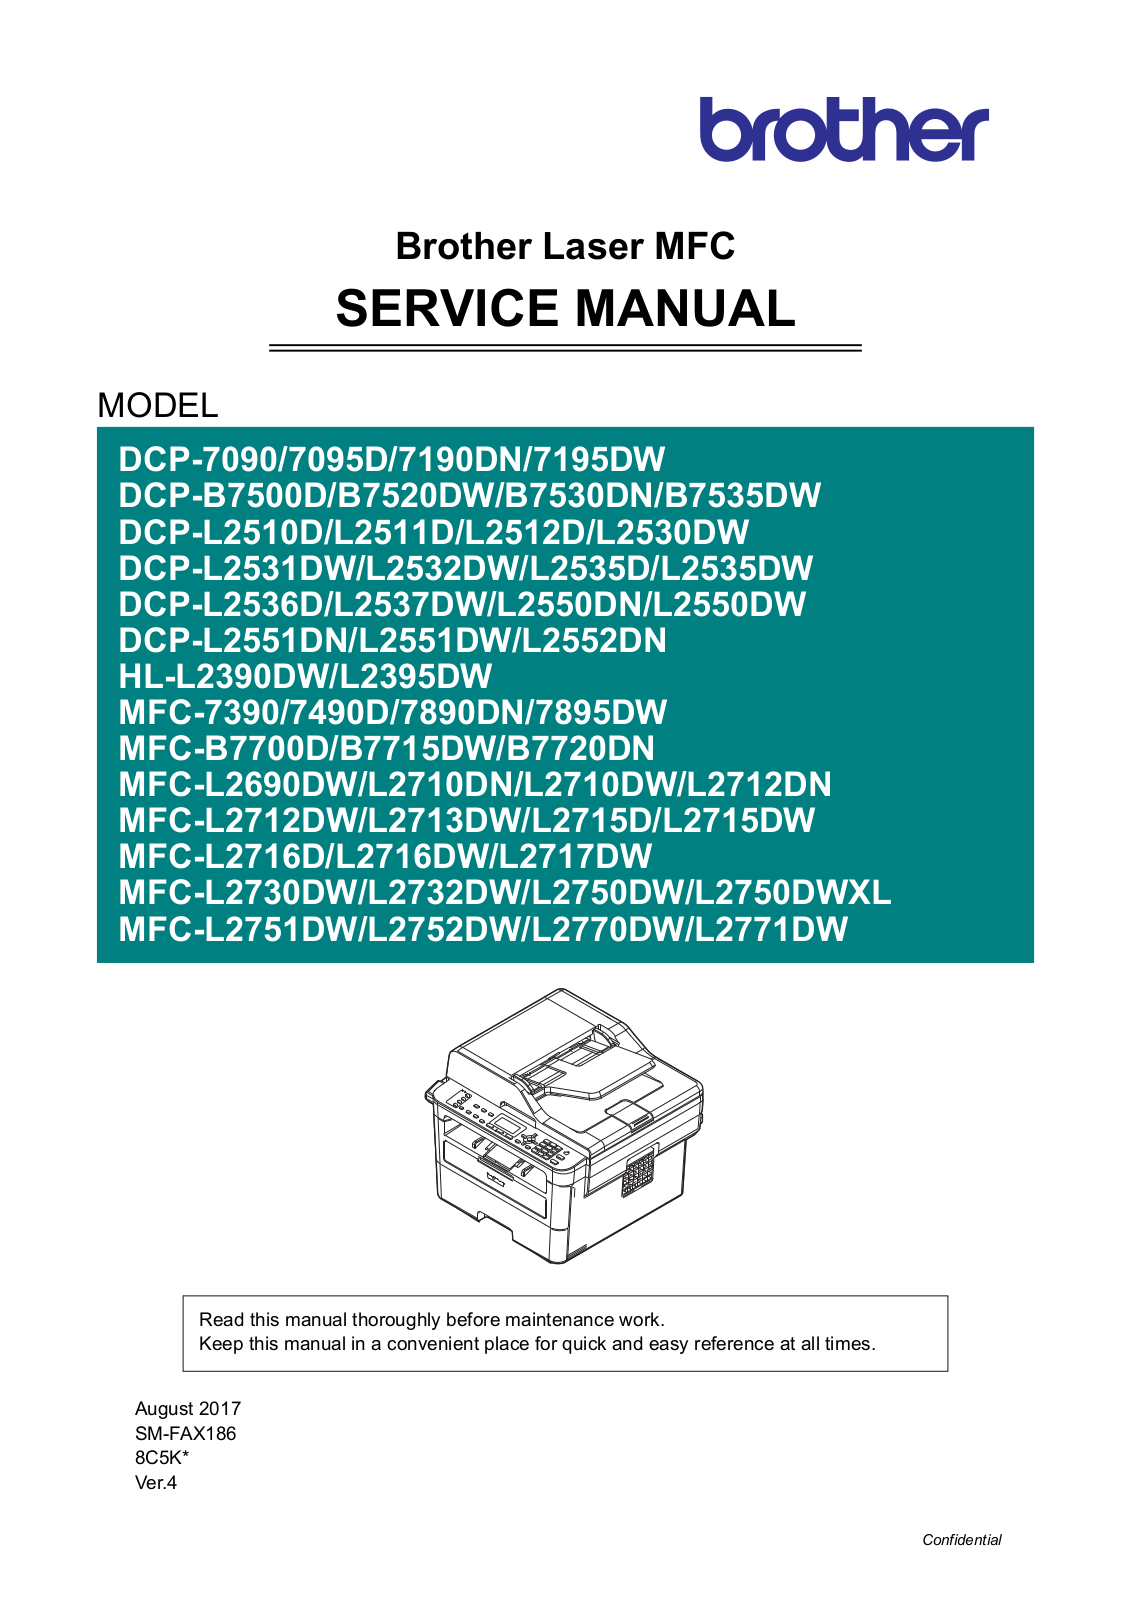 Brother dcp 7090, dcp7095d, dcp 7190dn, dcp 7195dw, dcp b7500d Service Manual